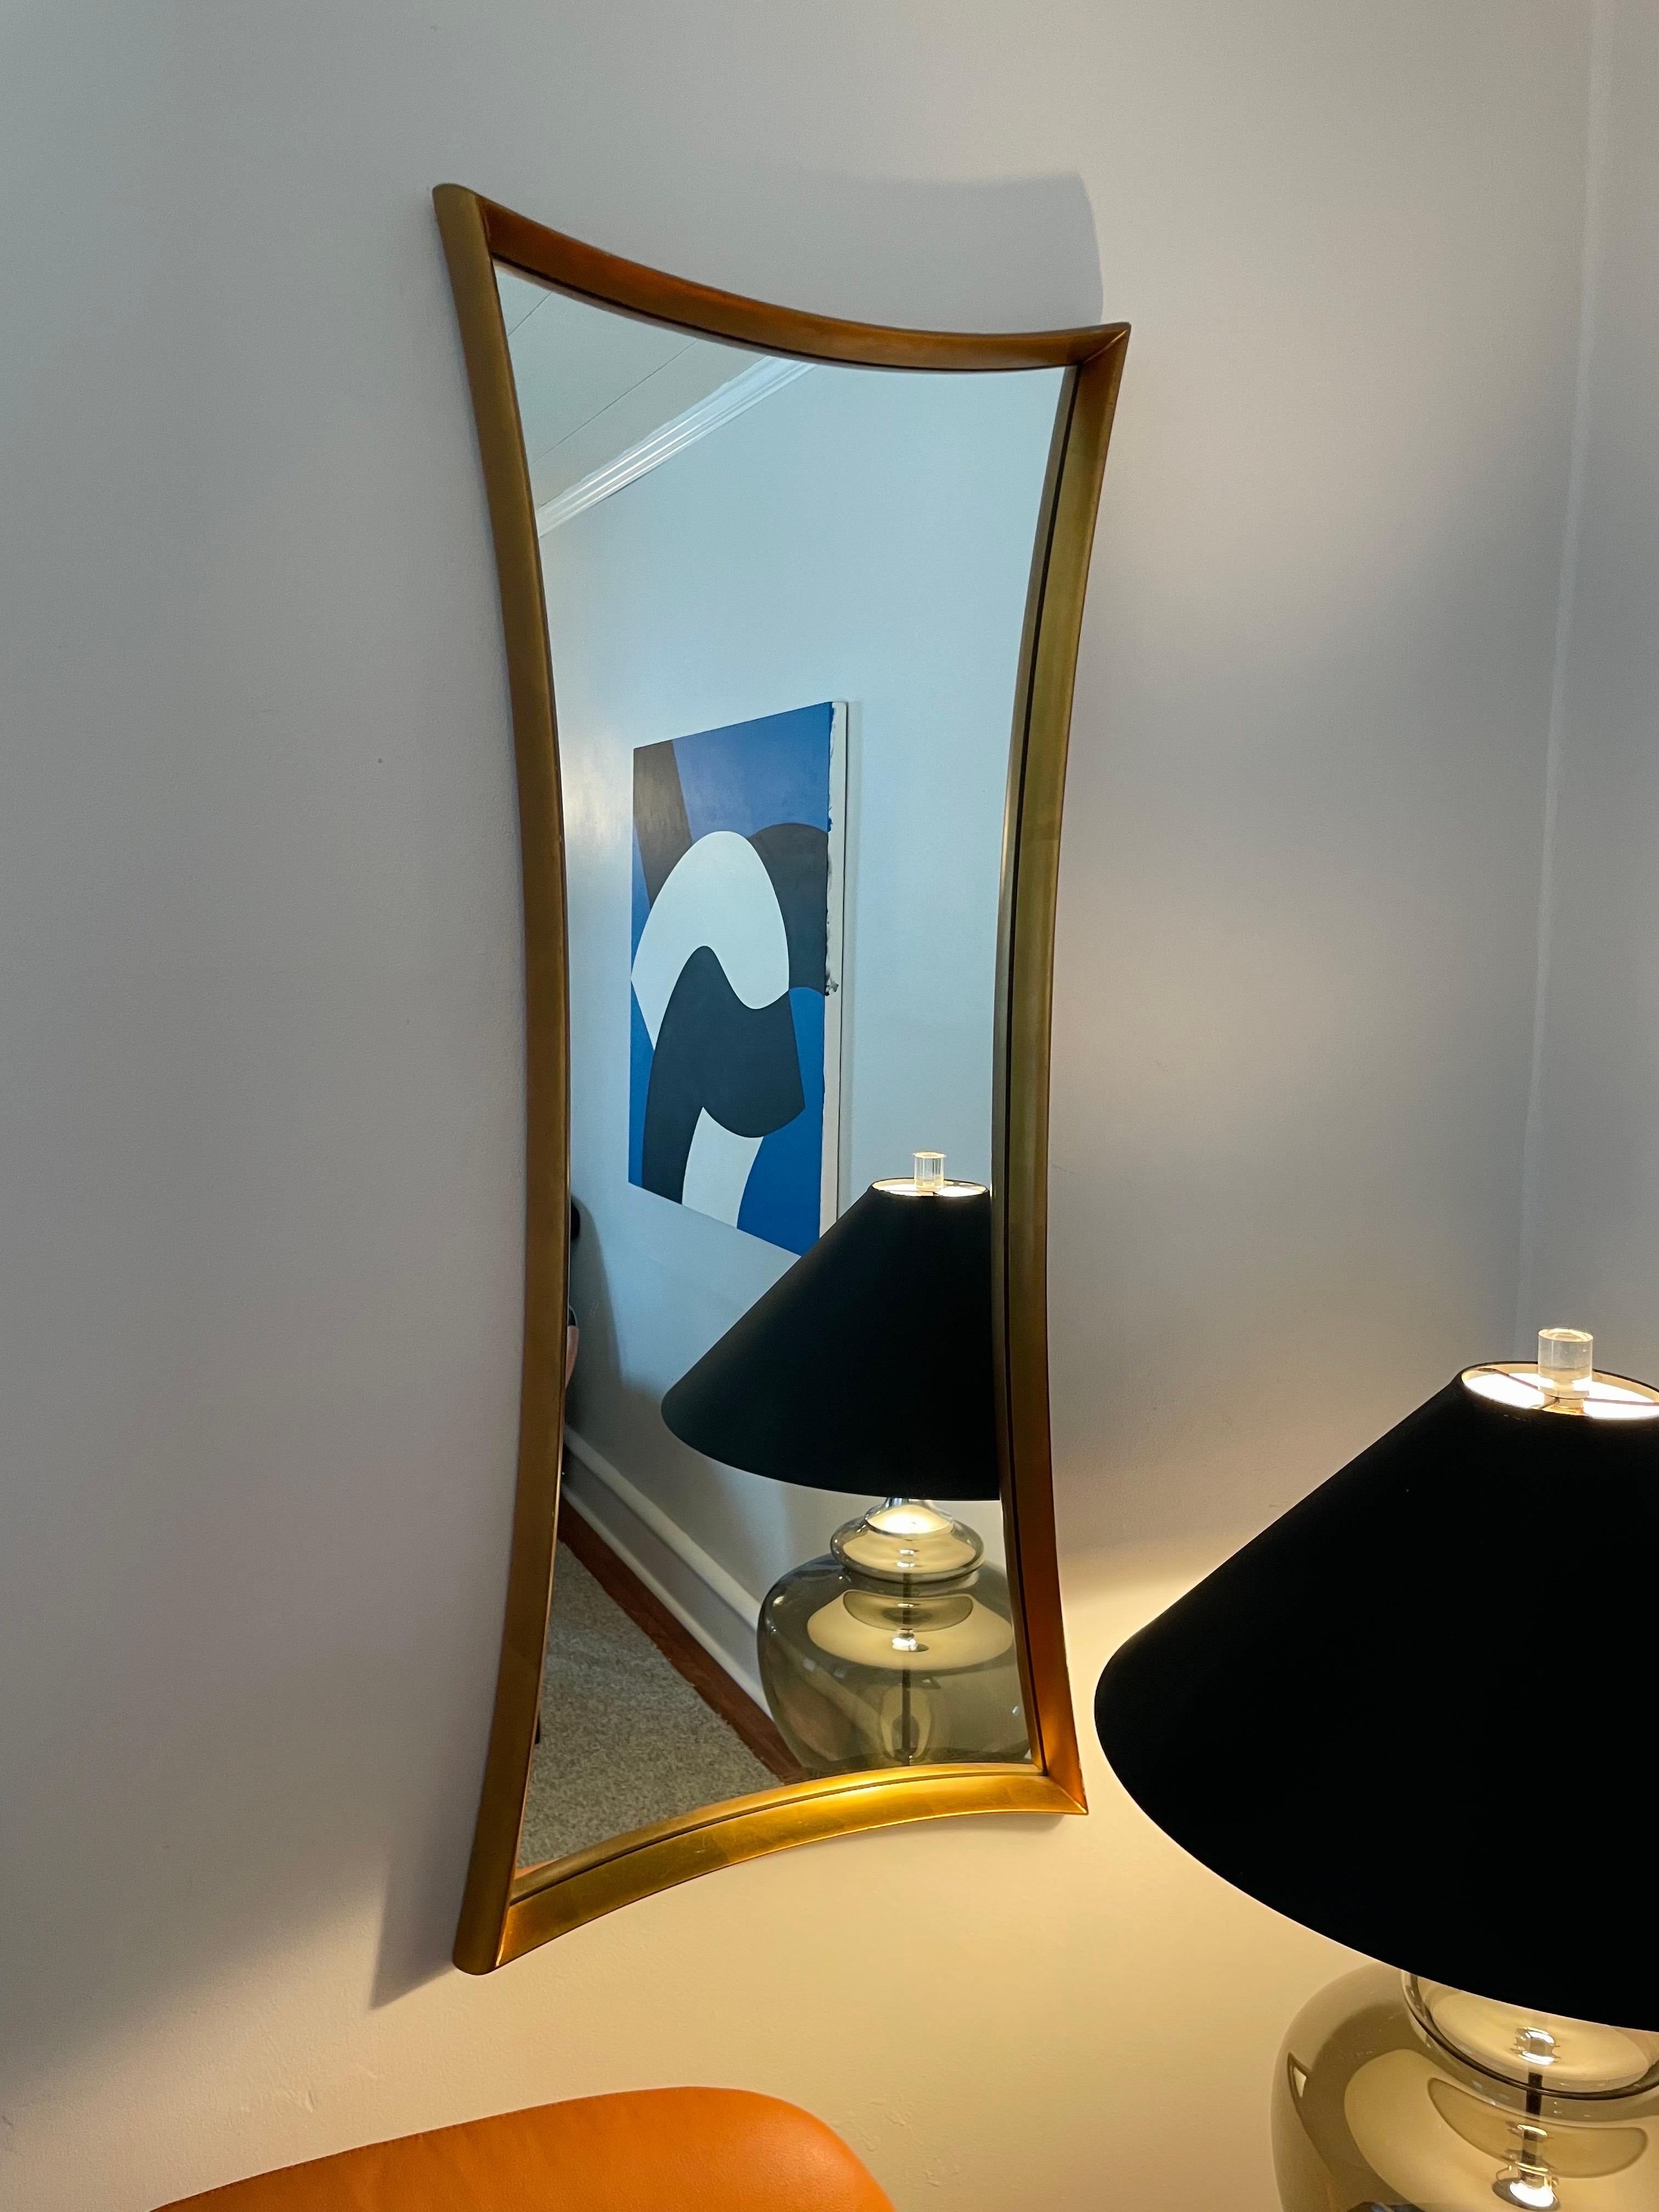 This is a large Giltwood bow-tie mirror from the 1950s.

It is in excellent shape, having been unmoved from its initial hanging spot for several decades.

